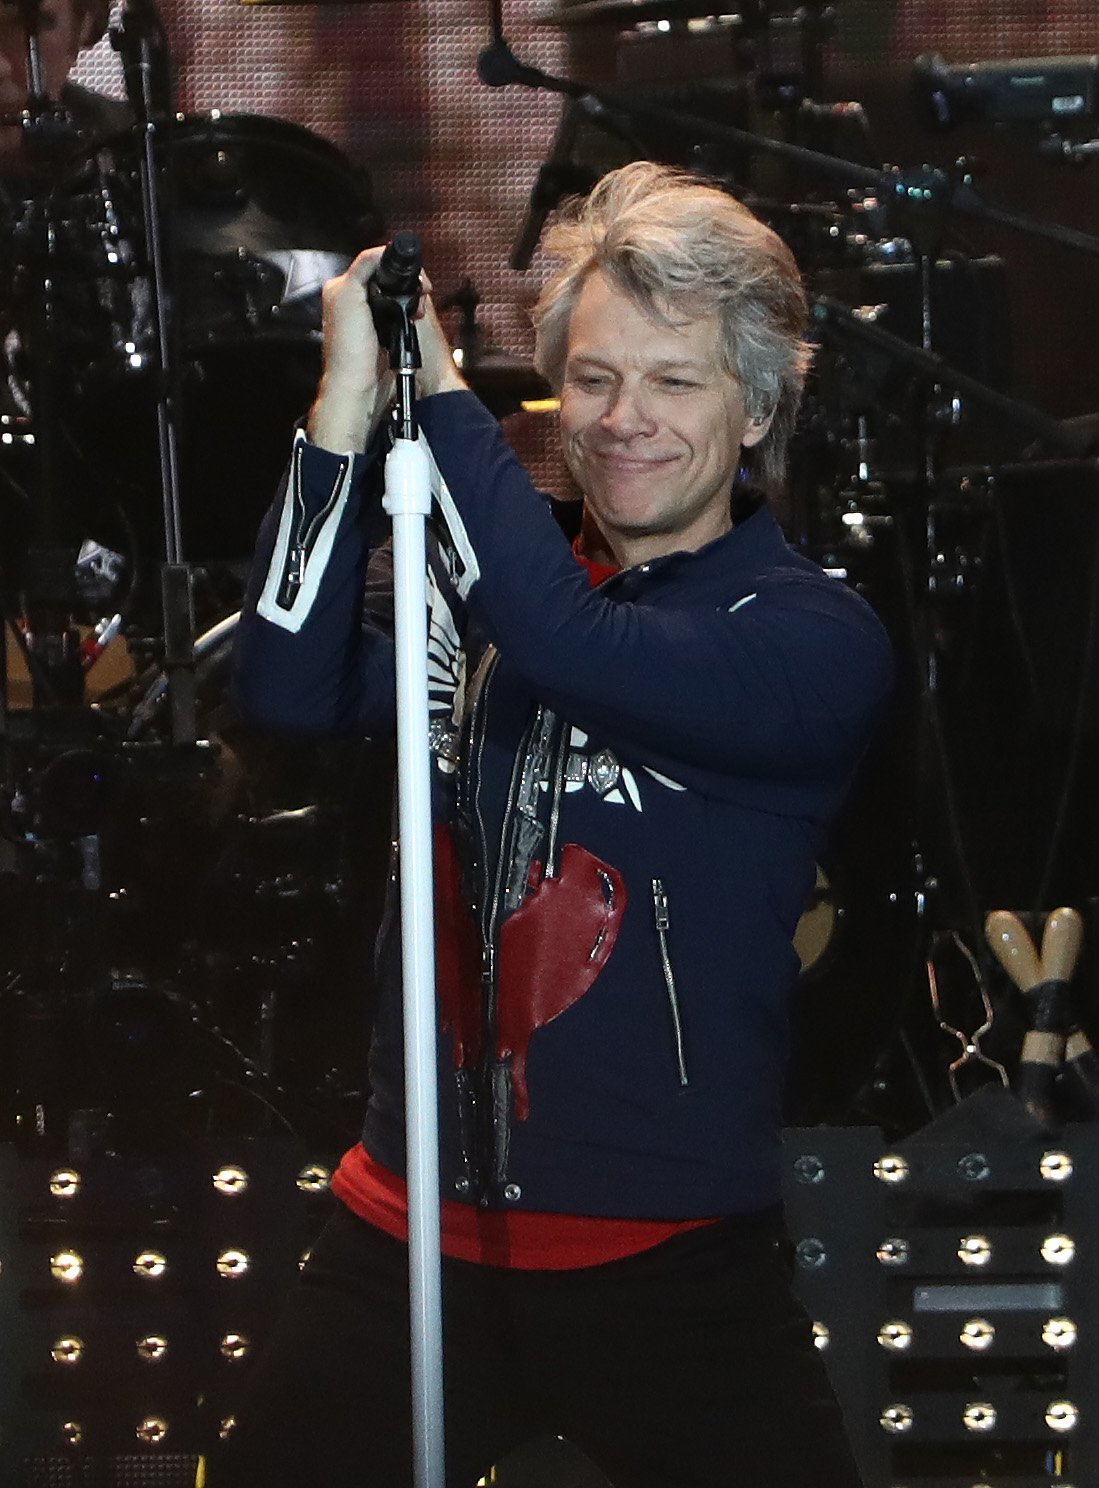 Jon Bon Jovi performing during the "Bon Jovi This House Is Not For Sale" Tour. | Source: Getty Images